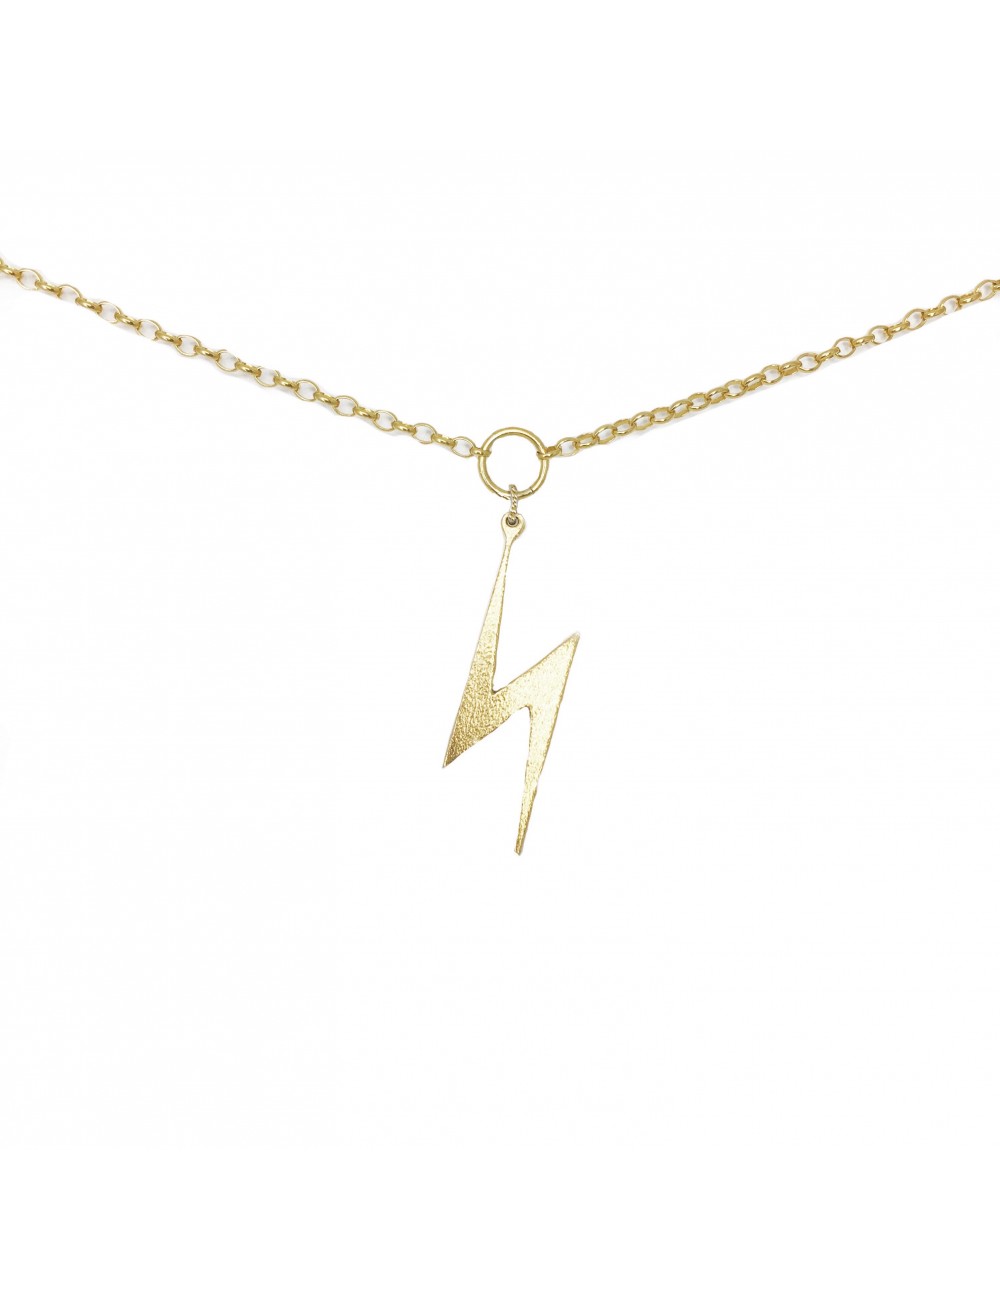 Meeting Spider To detect ICONS BY ALDO NECKLACE LIGHTNING IN STERLING SILVER VERMEIL